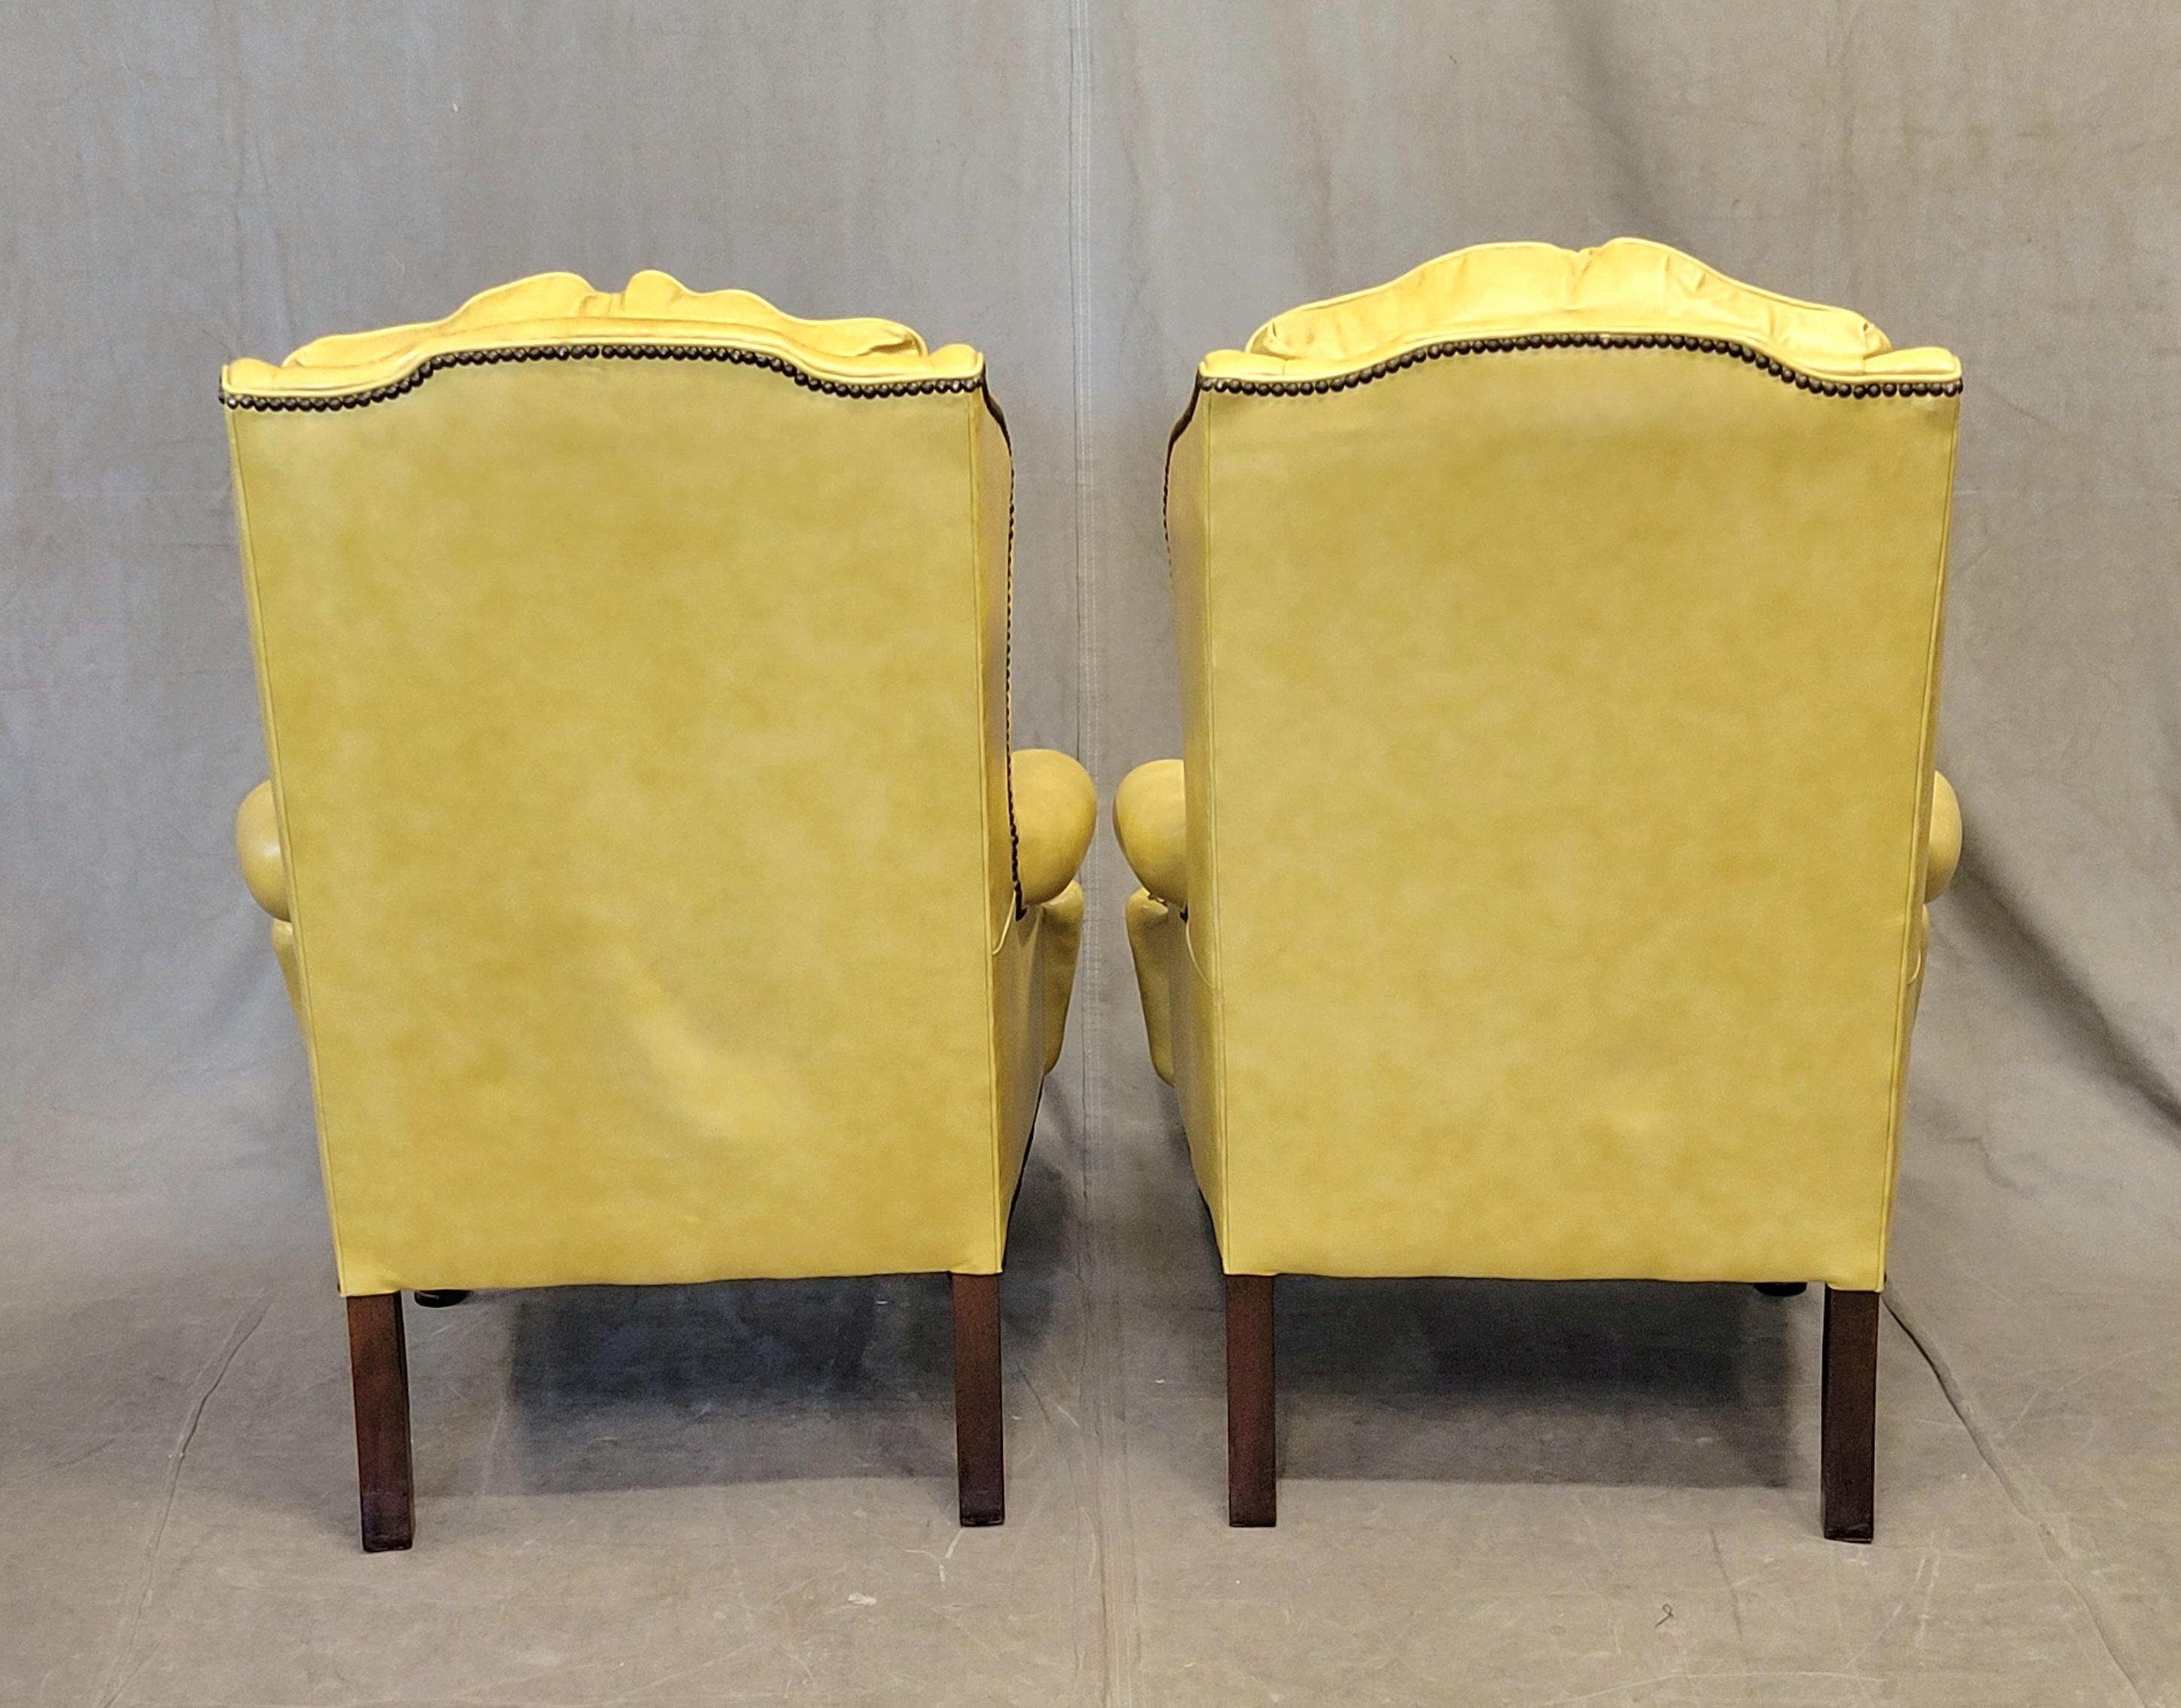 Vintage Classic Brand Top Grain Yellow Leather Chesterfield Chairs - a Pair For Sale 5